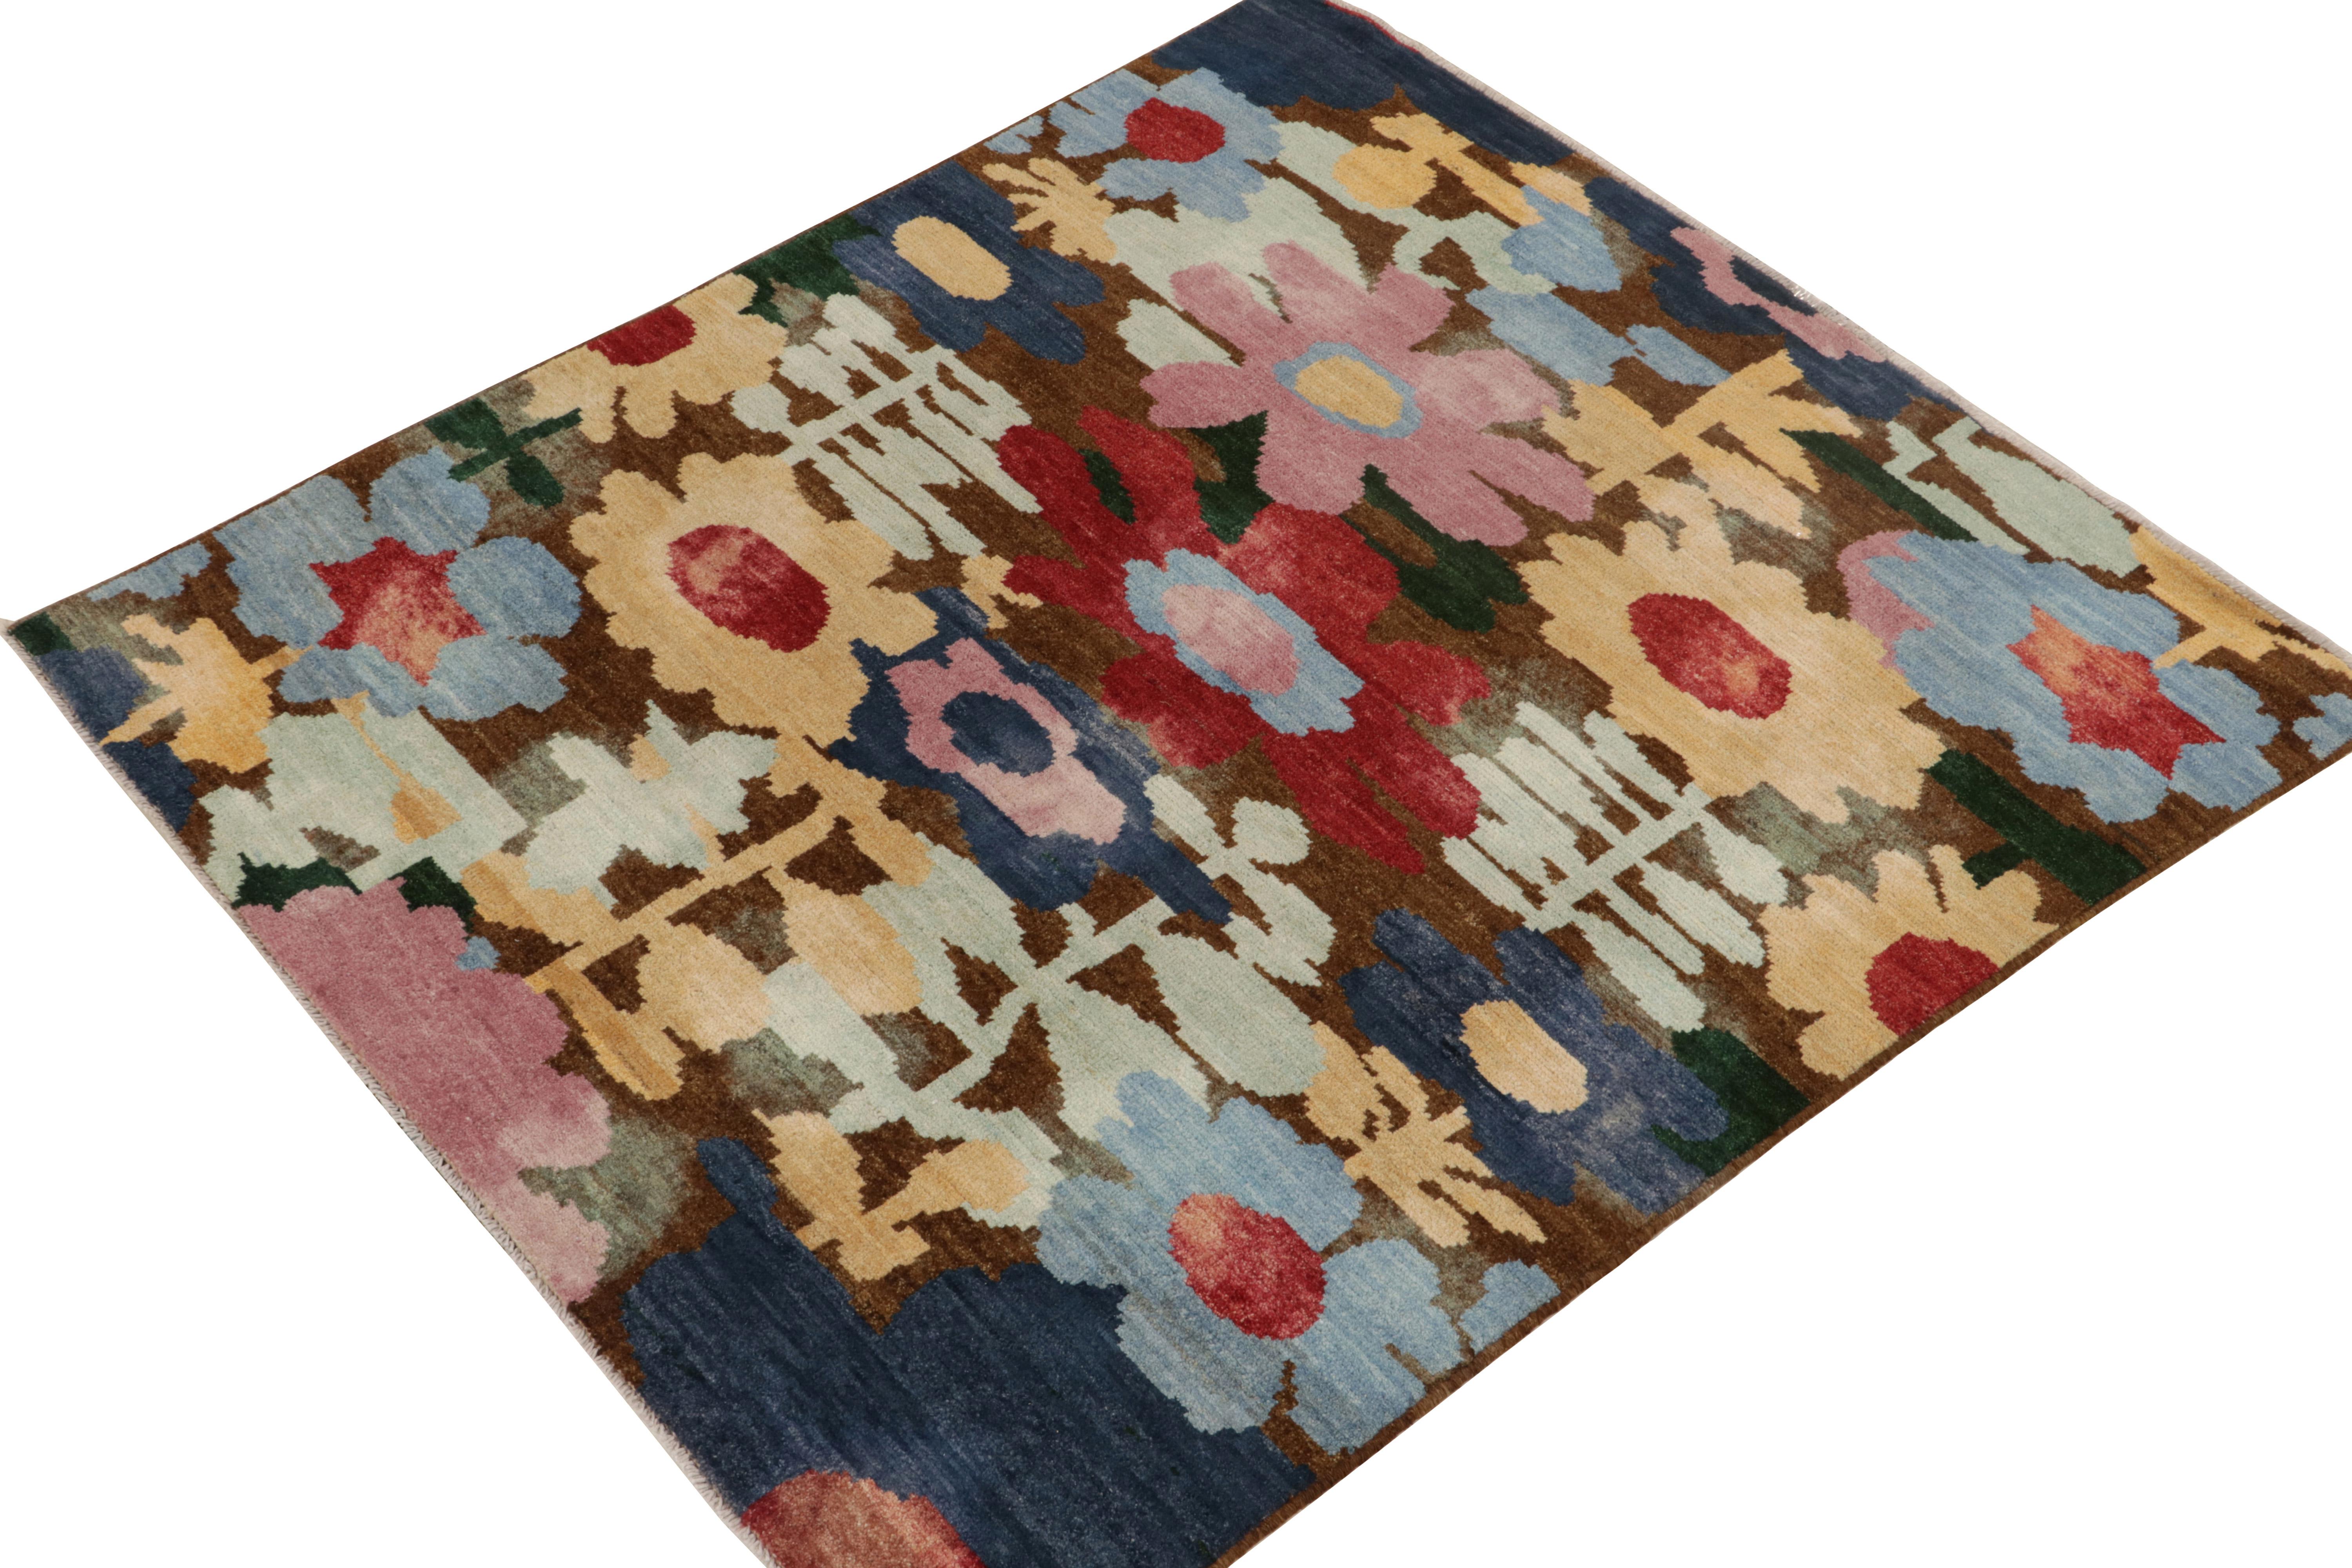 Hand-knotted in wool, a square 6x6 rug from the latest unveilings of Rug & Kilim’s New & Modern Collection. 

On the Design: This refreshing piece enjoys multicolor florals for a playful take on botanical designs. The beautiful play of rich brown